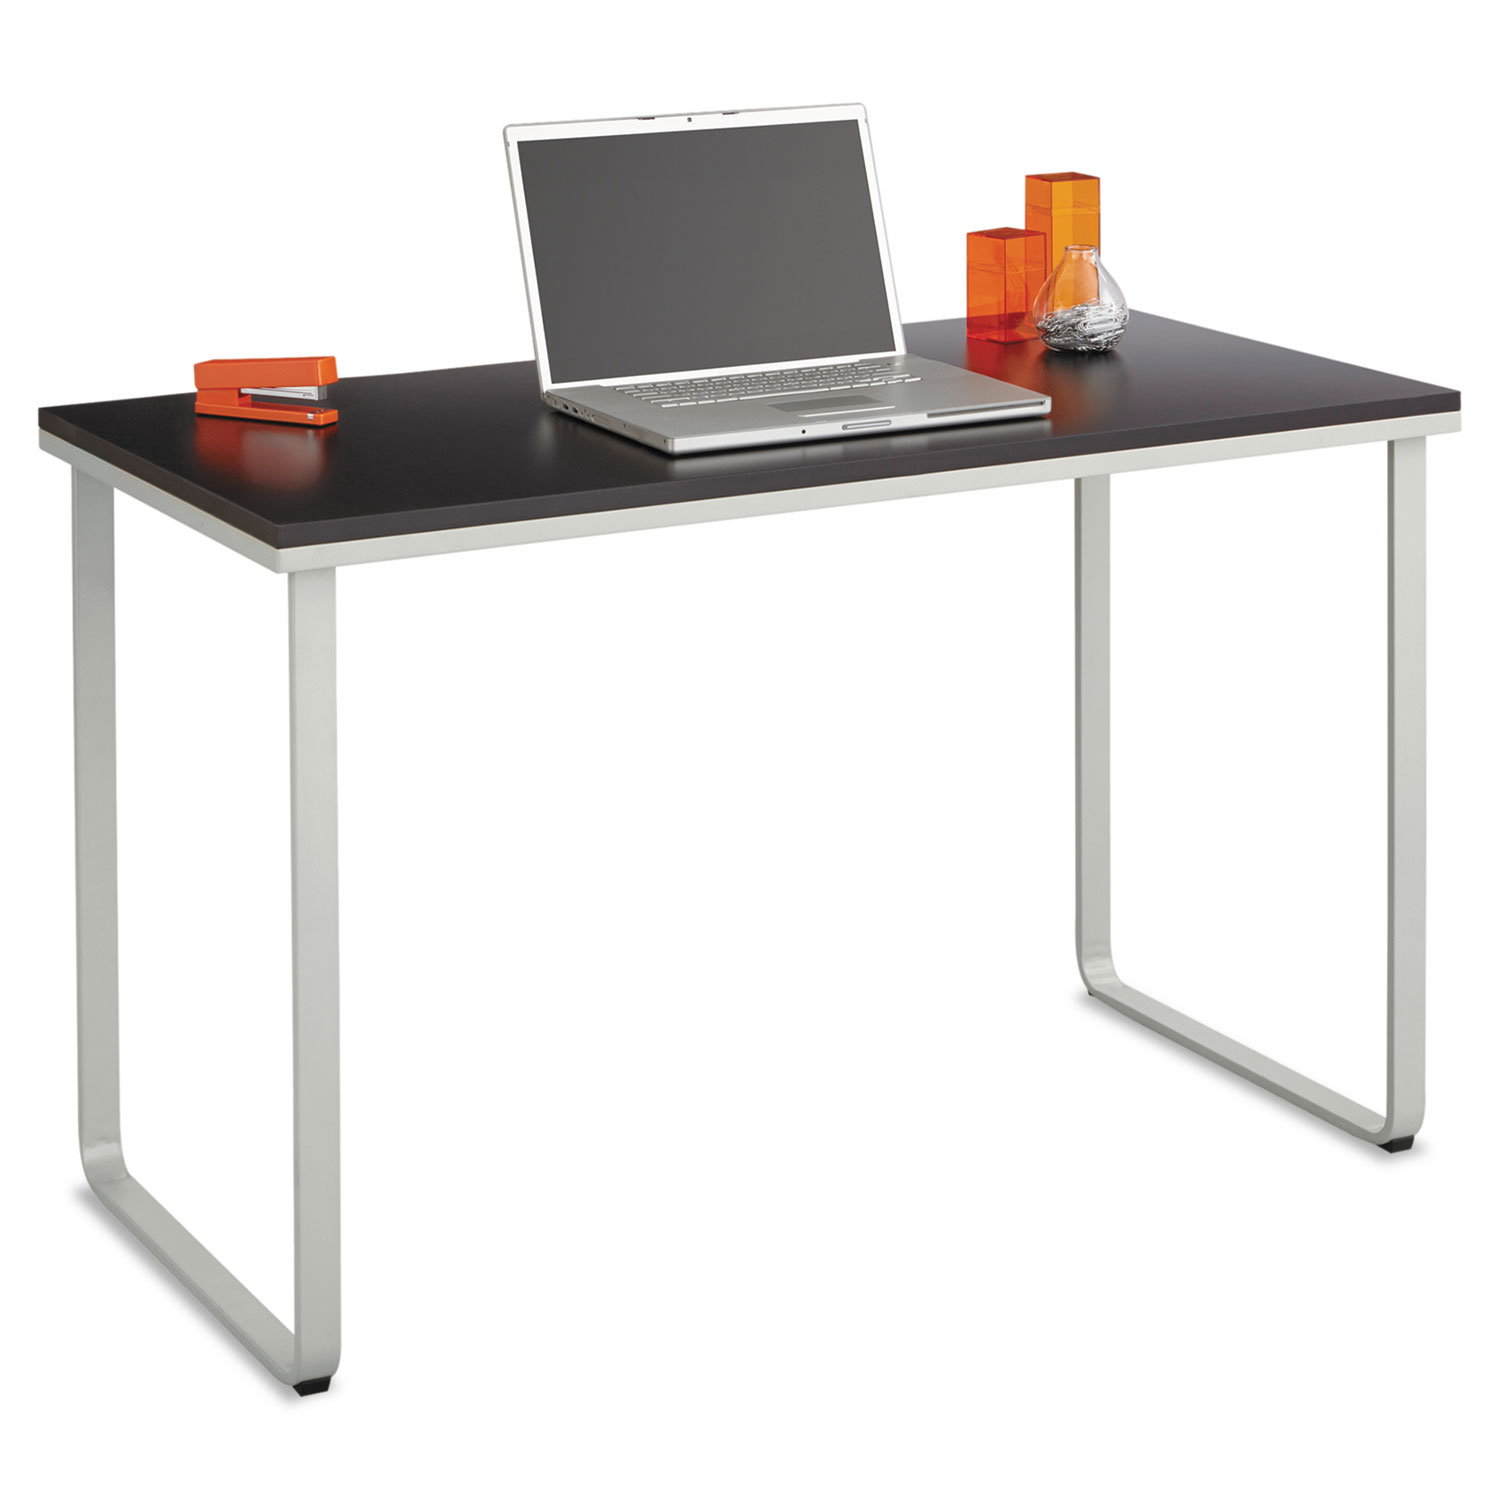 Safco Steel Workstation - Rectangle Top - U-shaped Base - 2 Legs - 47.25" Table Top Width x 24" Table Top Depth x 0.75" Table To